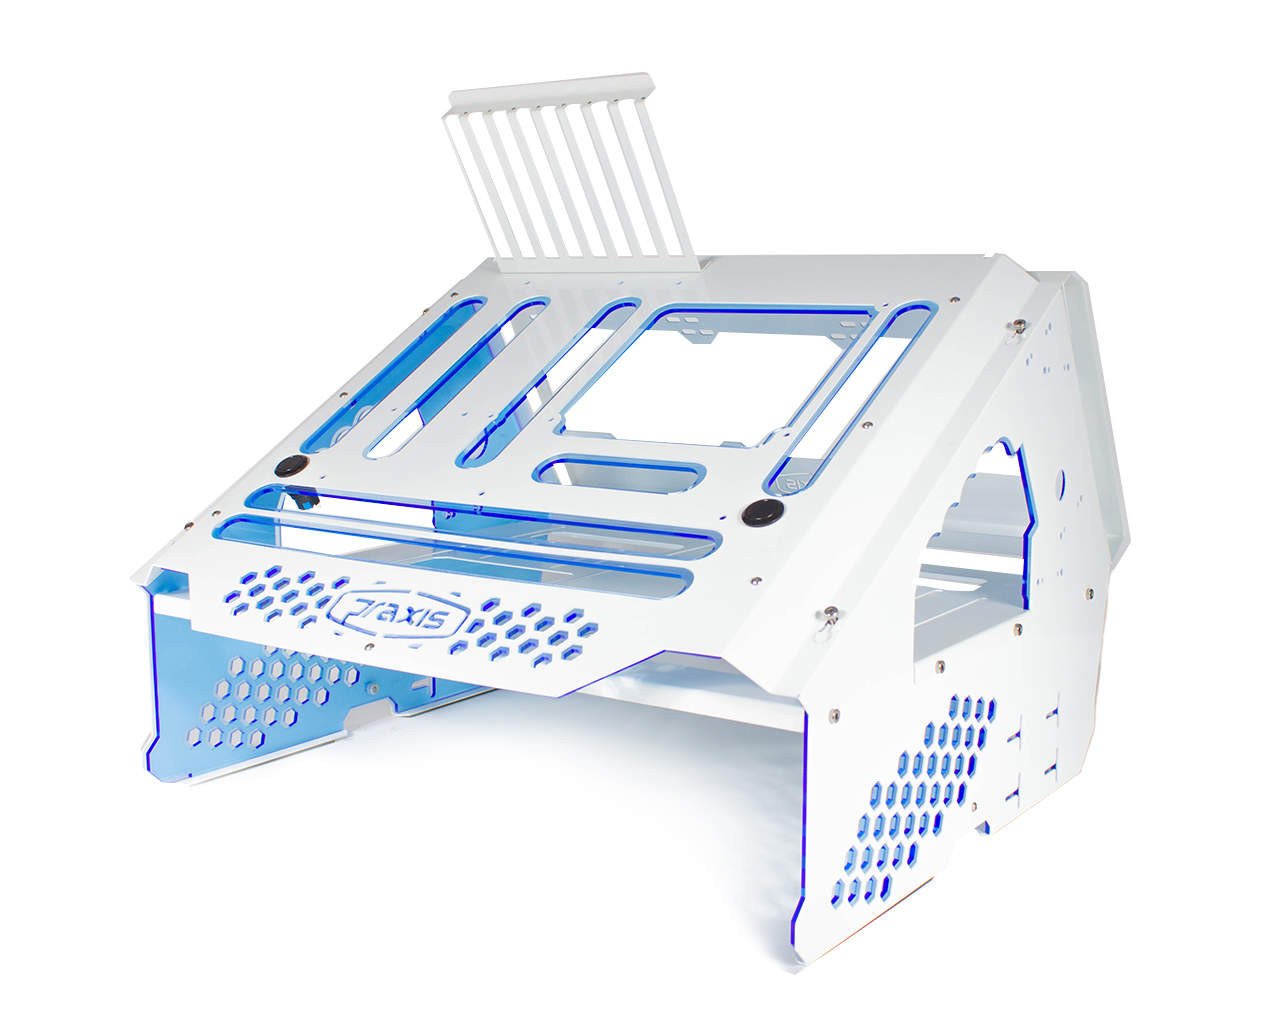 PrimoChill's Praxis Wetbench Powdercoated Steel Modular Open Air Computer Test Bench for Watercooling or Air Cooled Components - PrimoChill - KEEPING IT COOL White w/UV Blue Accents